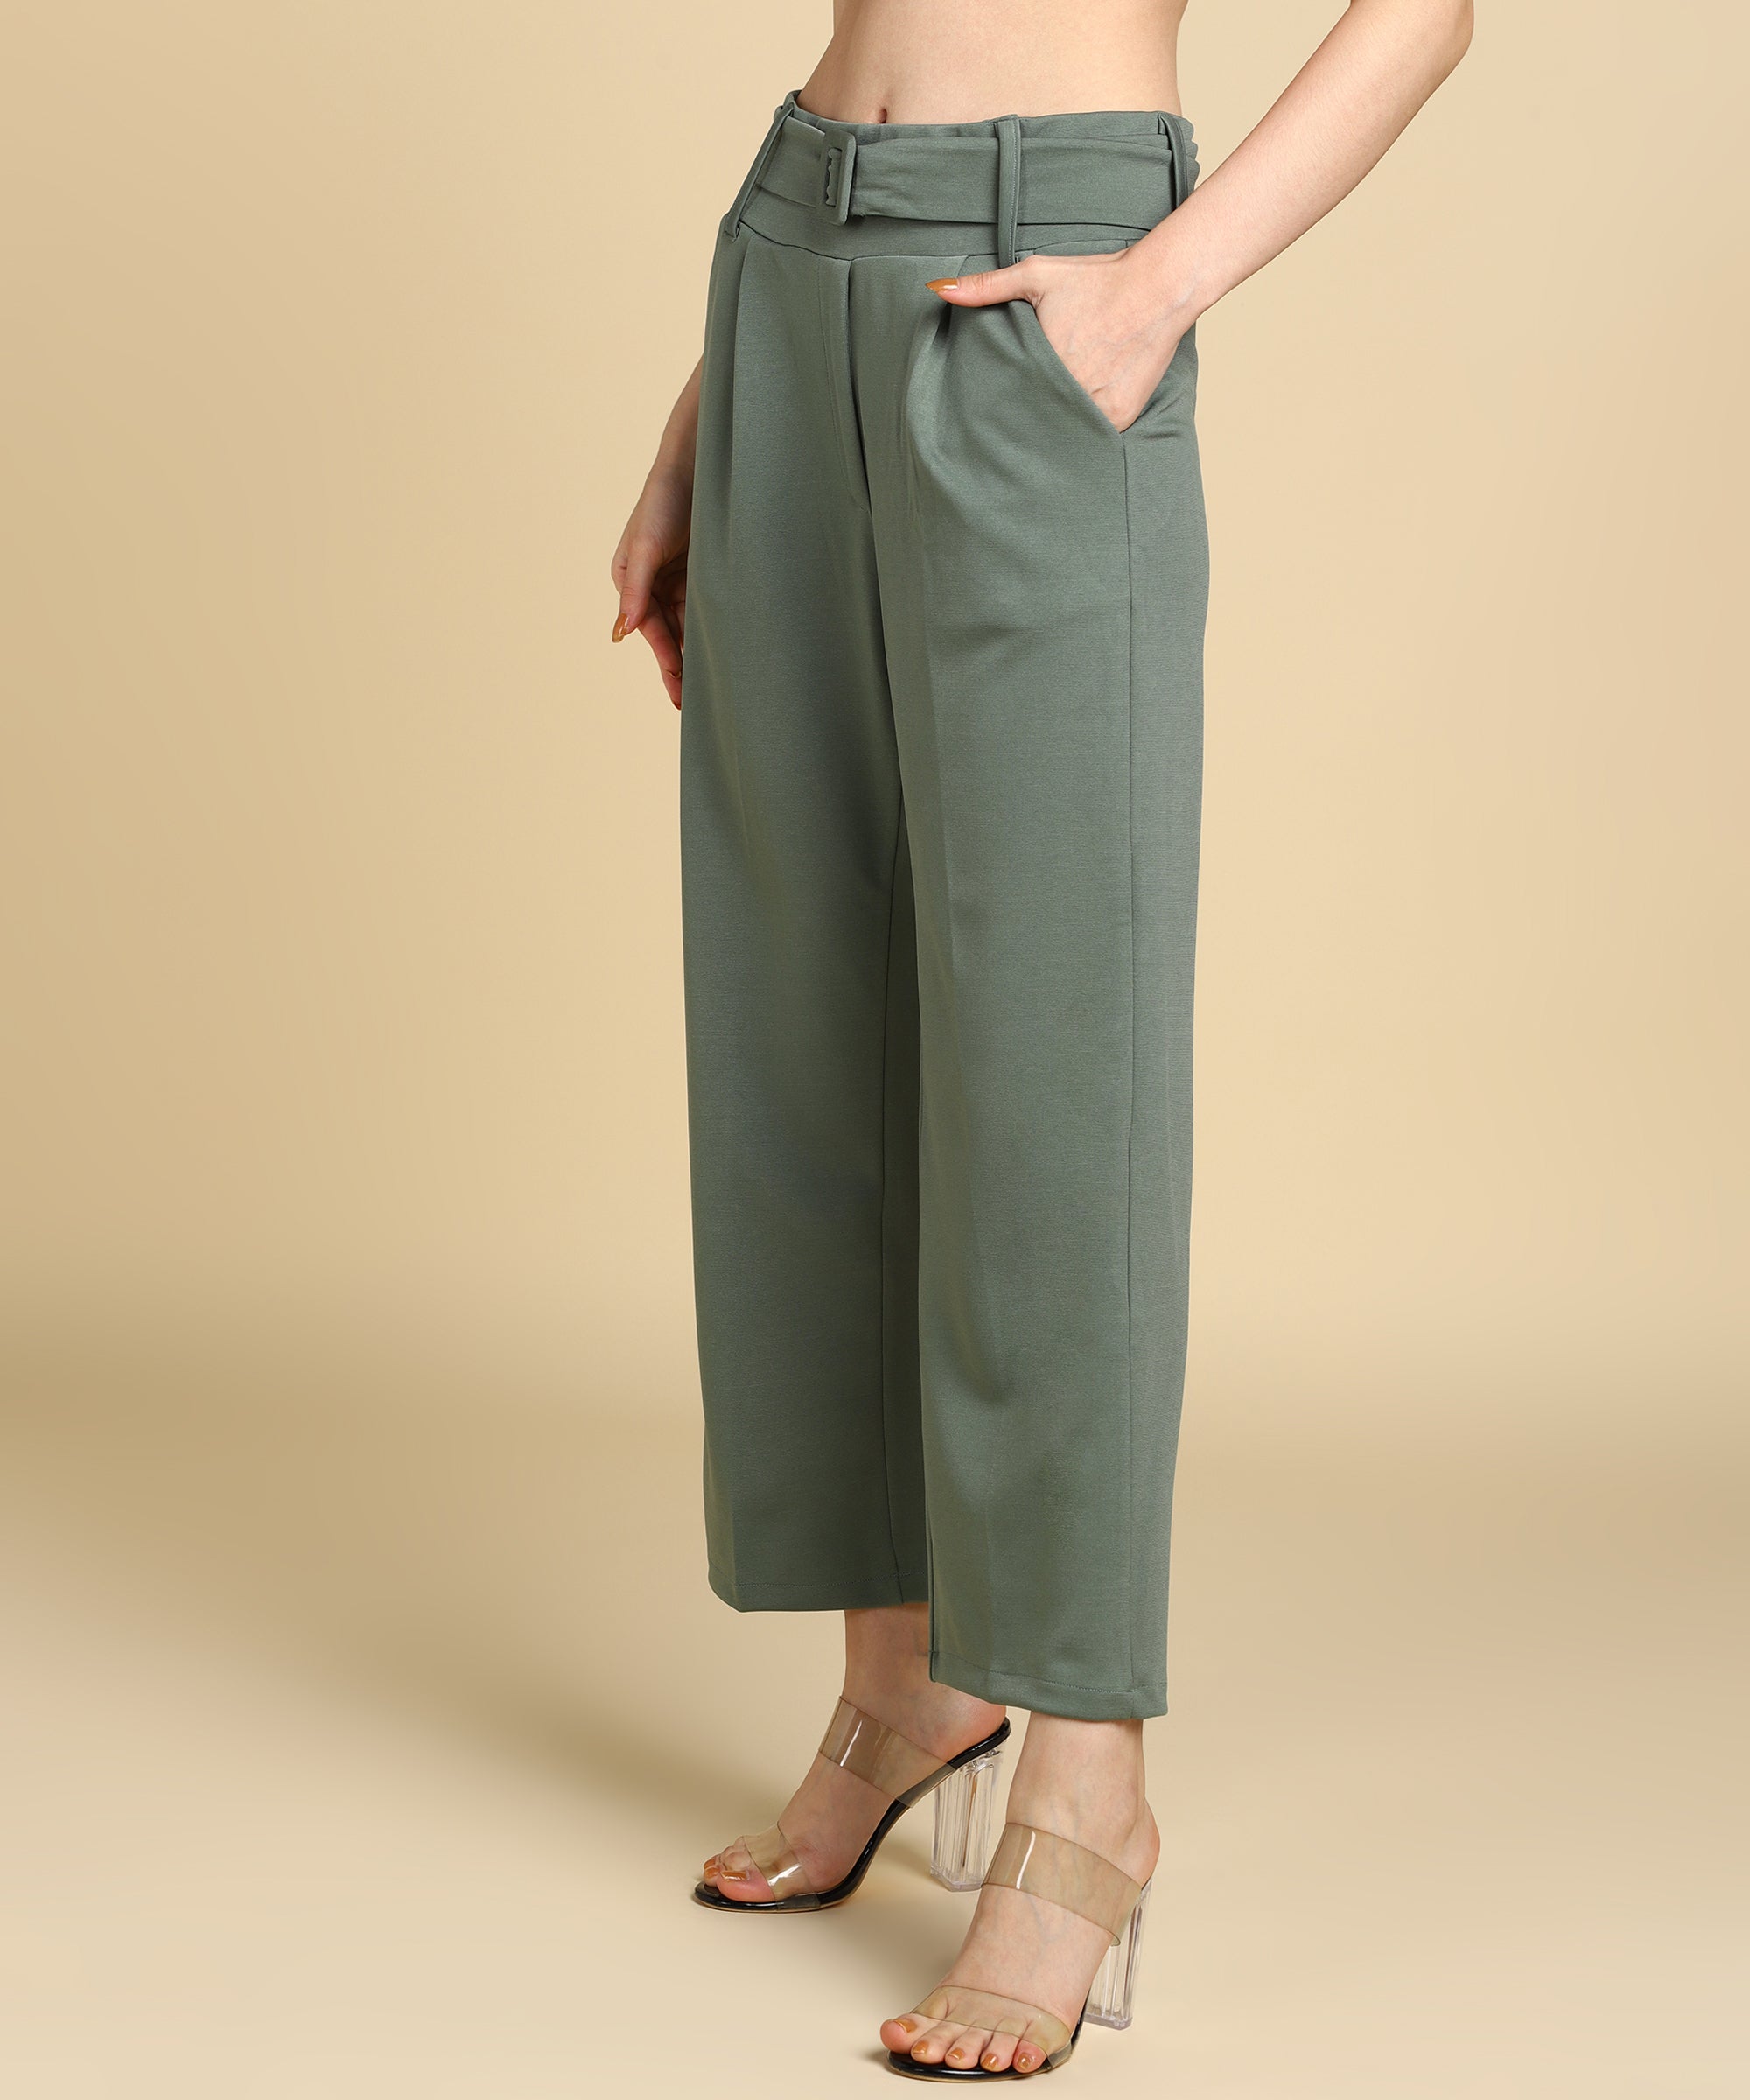 Parallel Trousers - Buy Parallel Trousers online in India